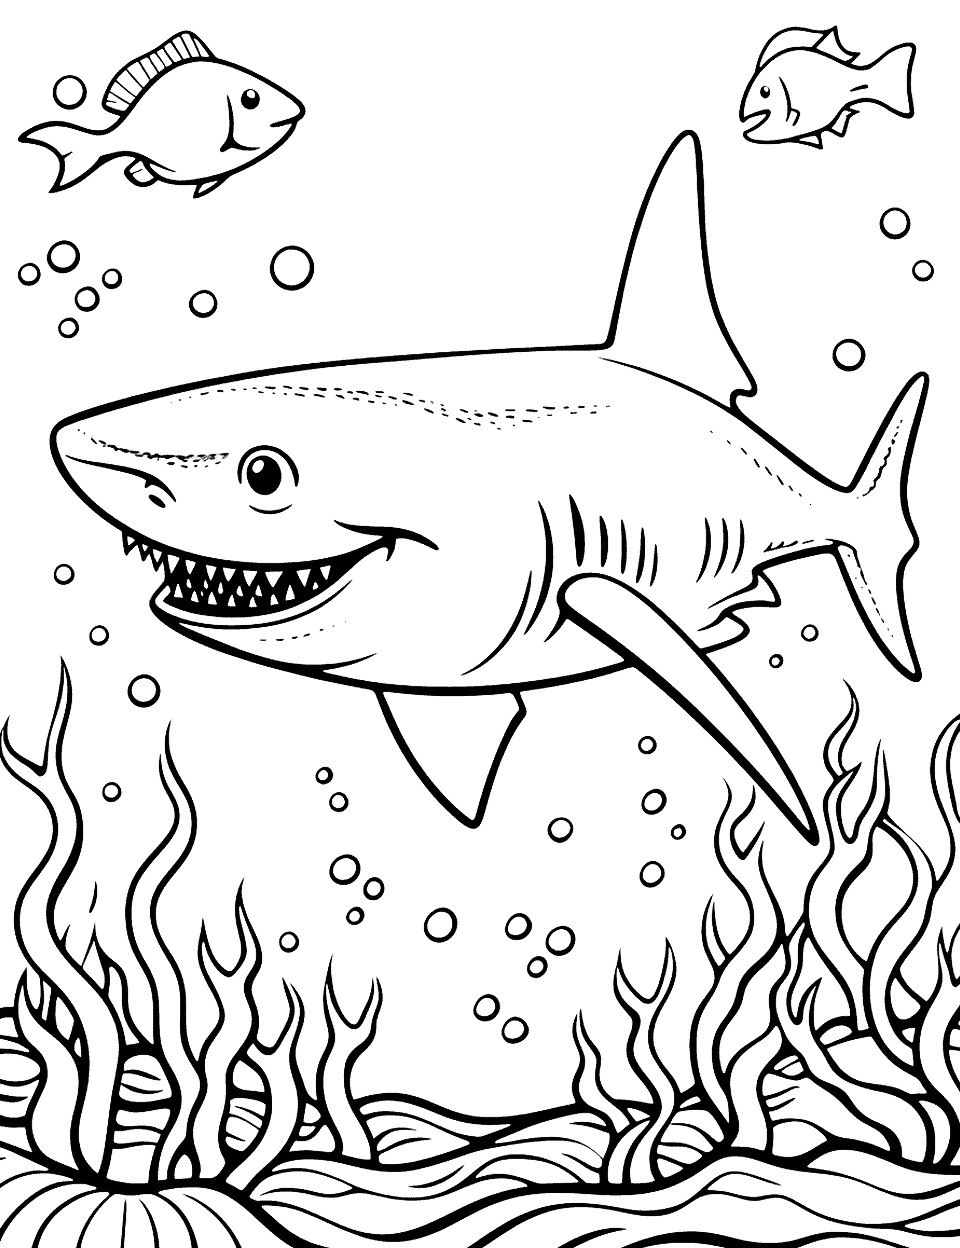 Shark and Coral Coloring Page - A leopard shark swimming by a vibrant sea coral.